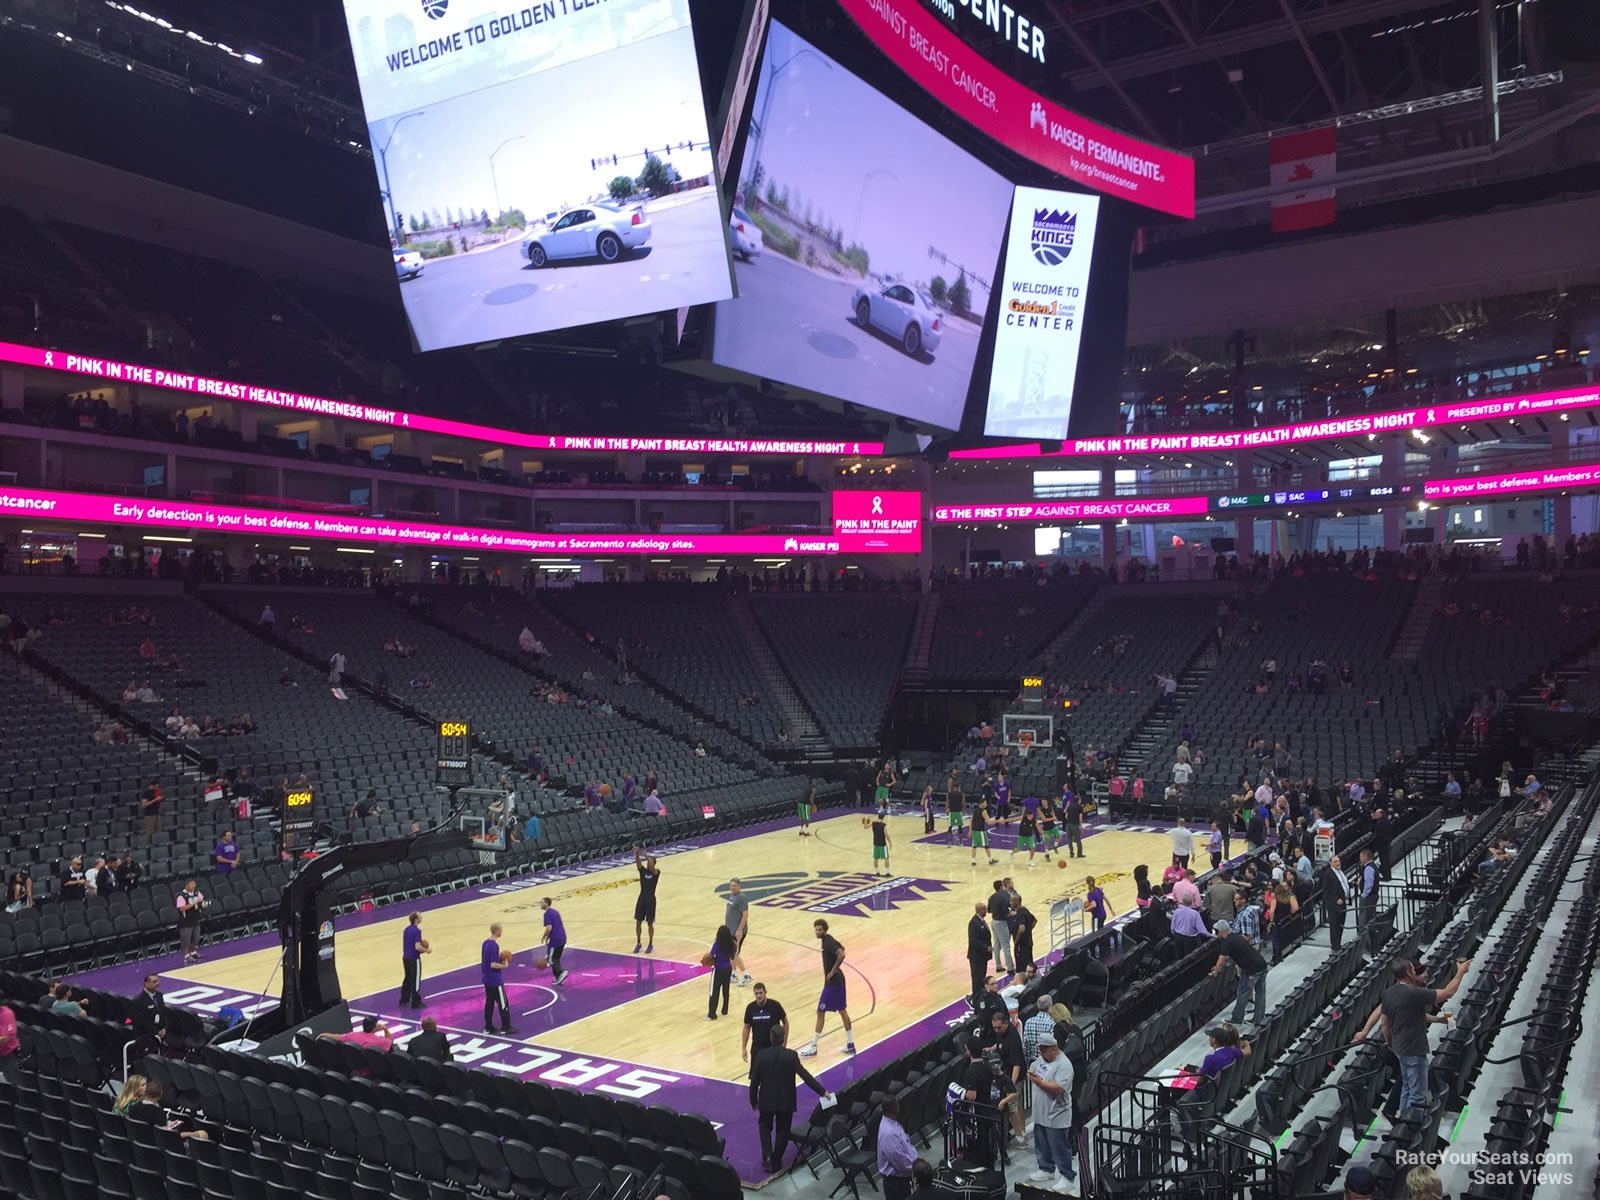 section 111, row h seat view  for basketball - golden 1 center